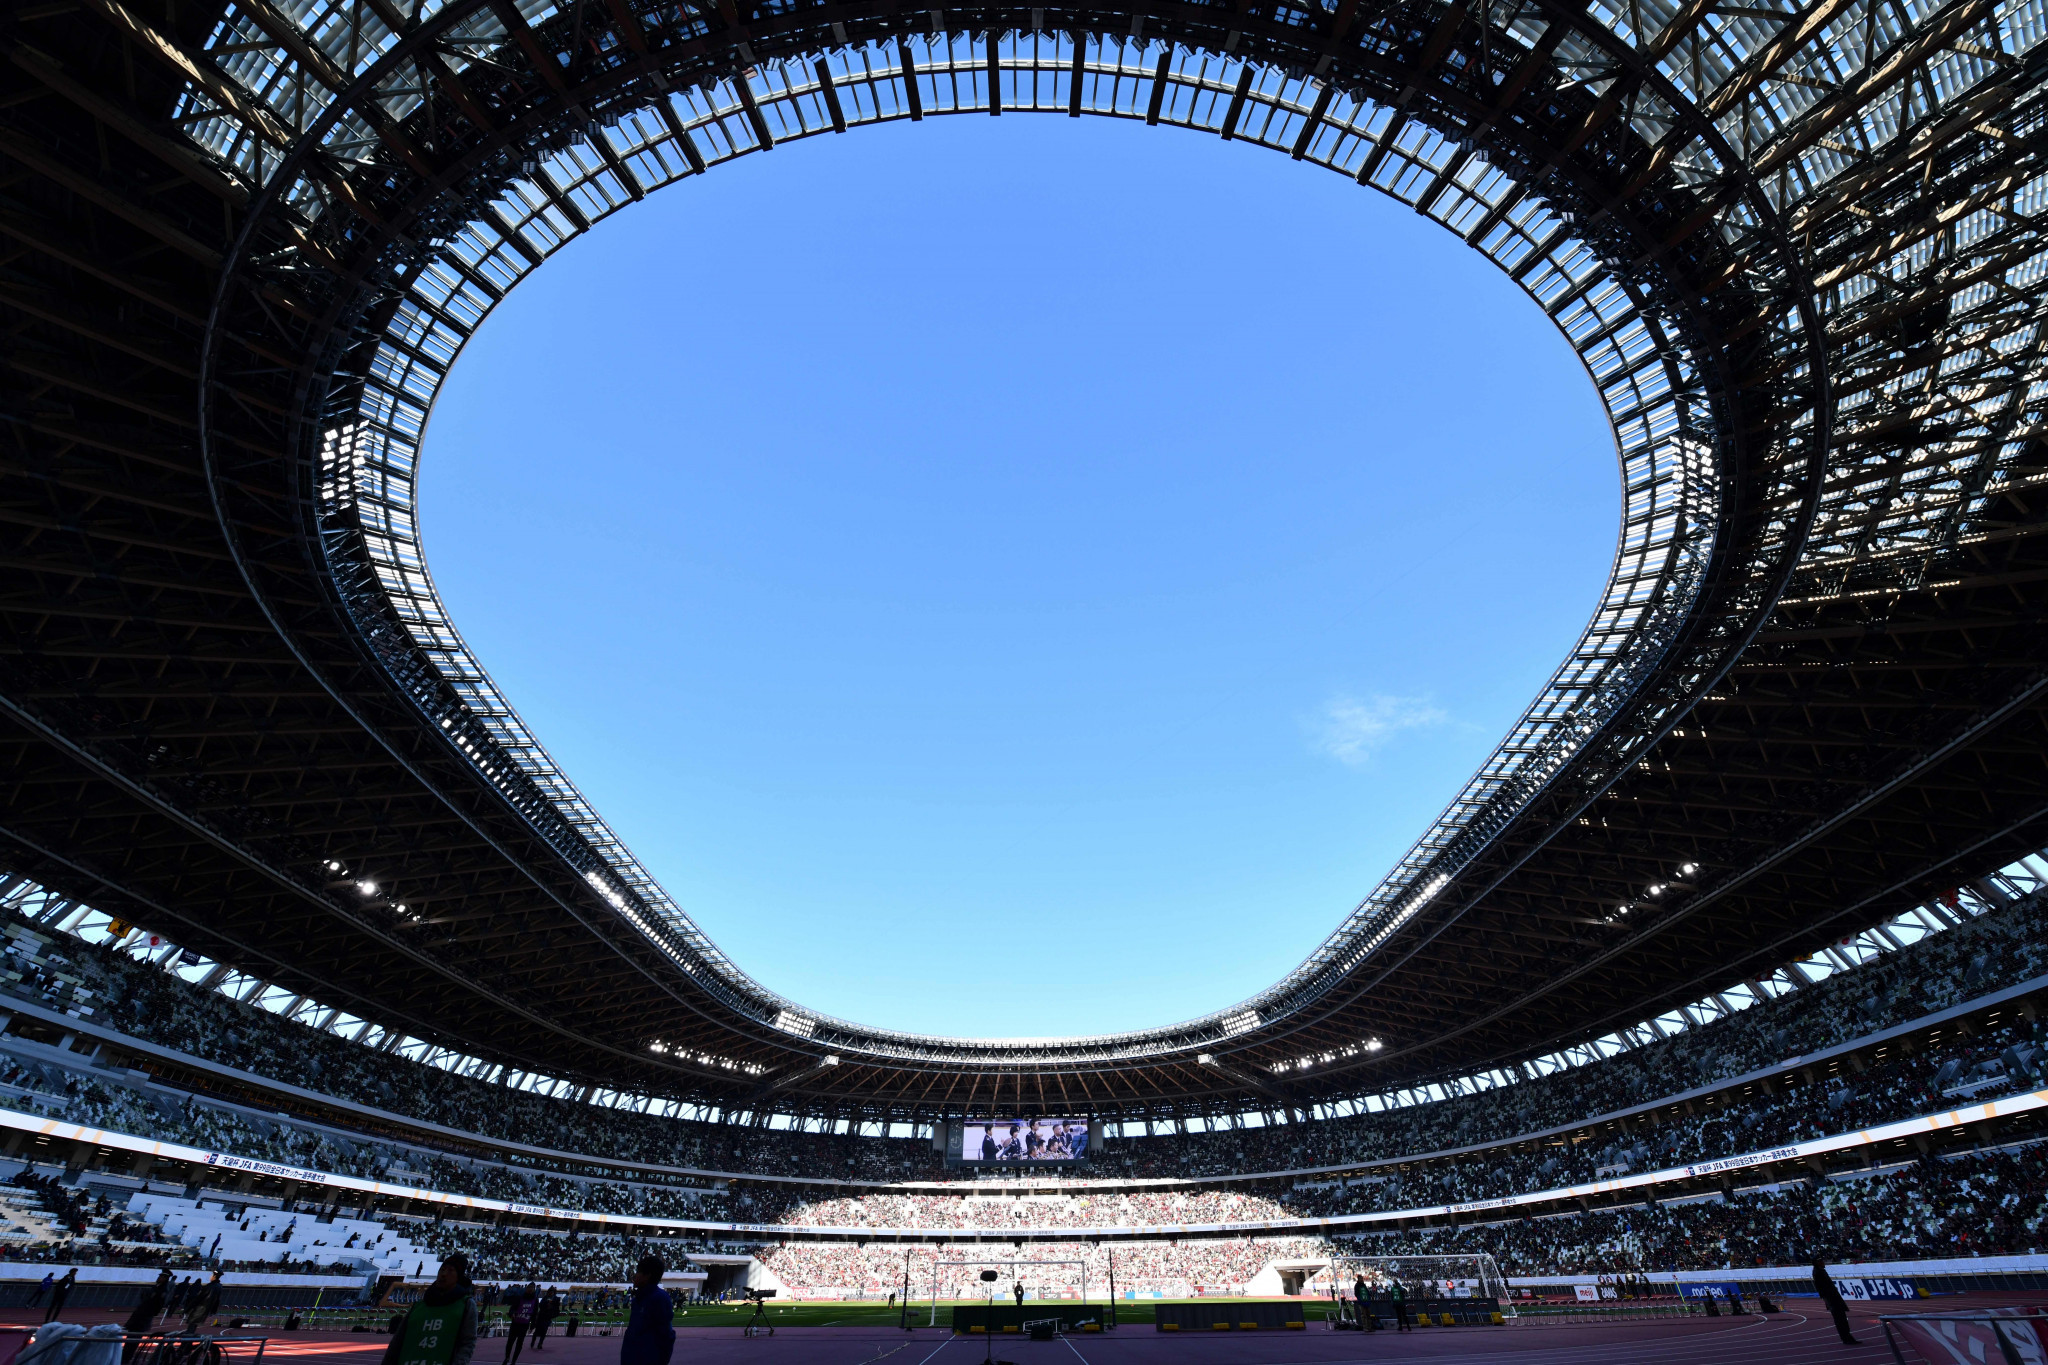 Peacock will provide live coverage of the Tokyo 2020 Opening and Closing Ceremonies at the New National Stadium, hours before they air on NBC in prime time ©Getty Images